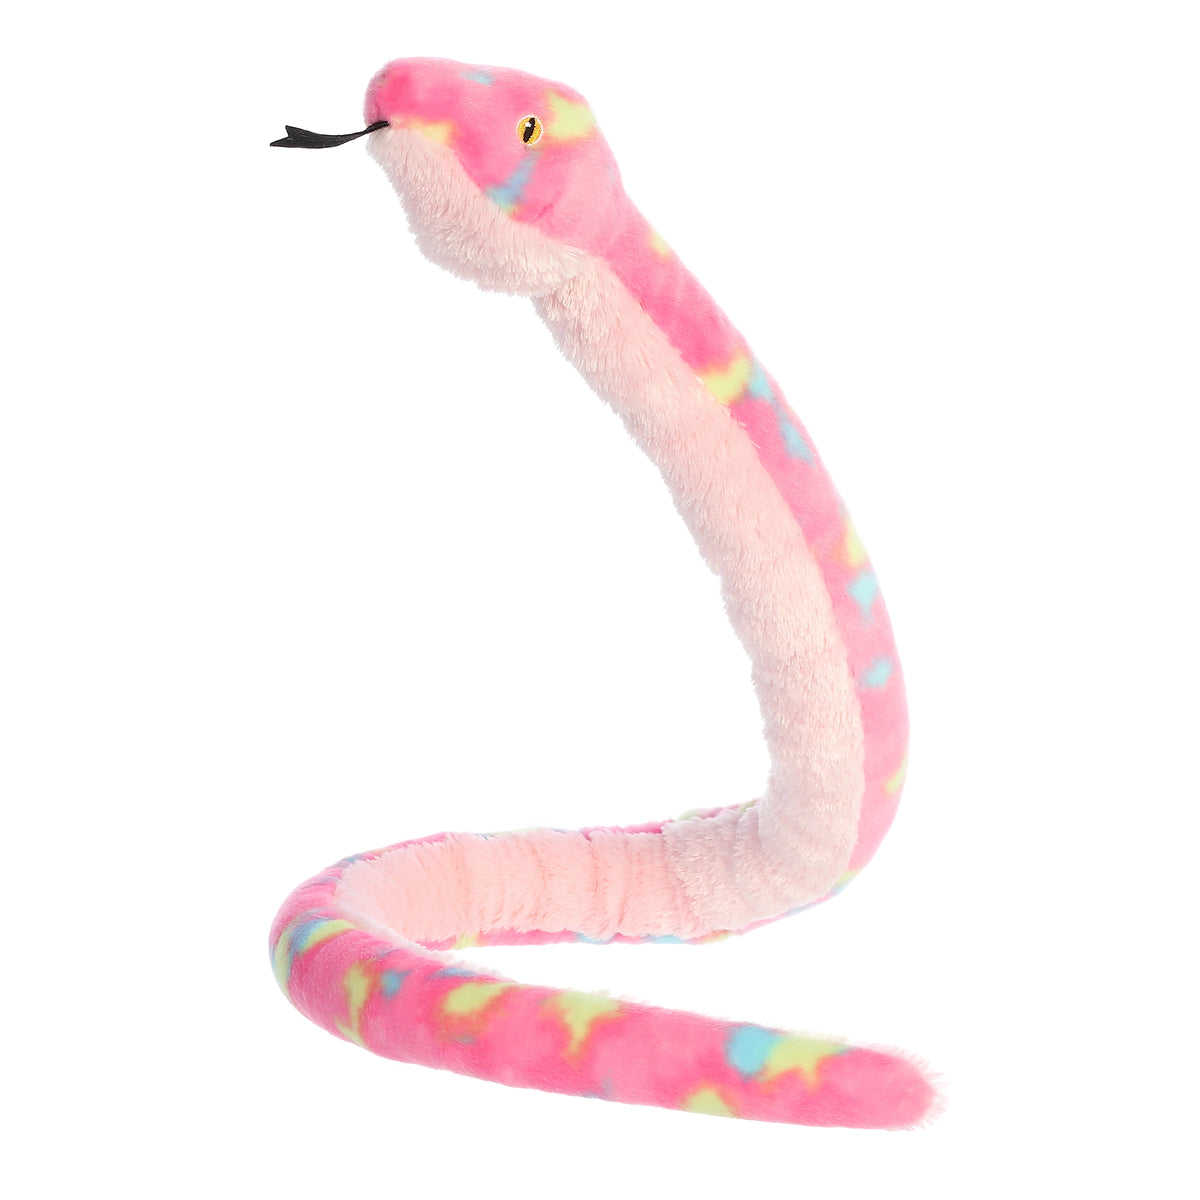 A long colorfully patterned snake stuffed animal plush that has a light pink body and blue and yellow spots throughout.